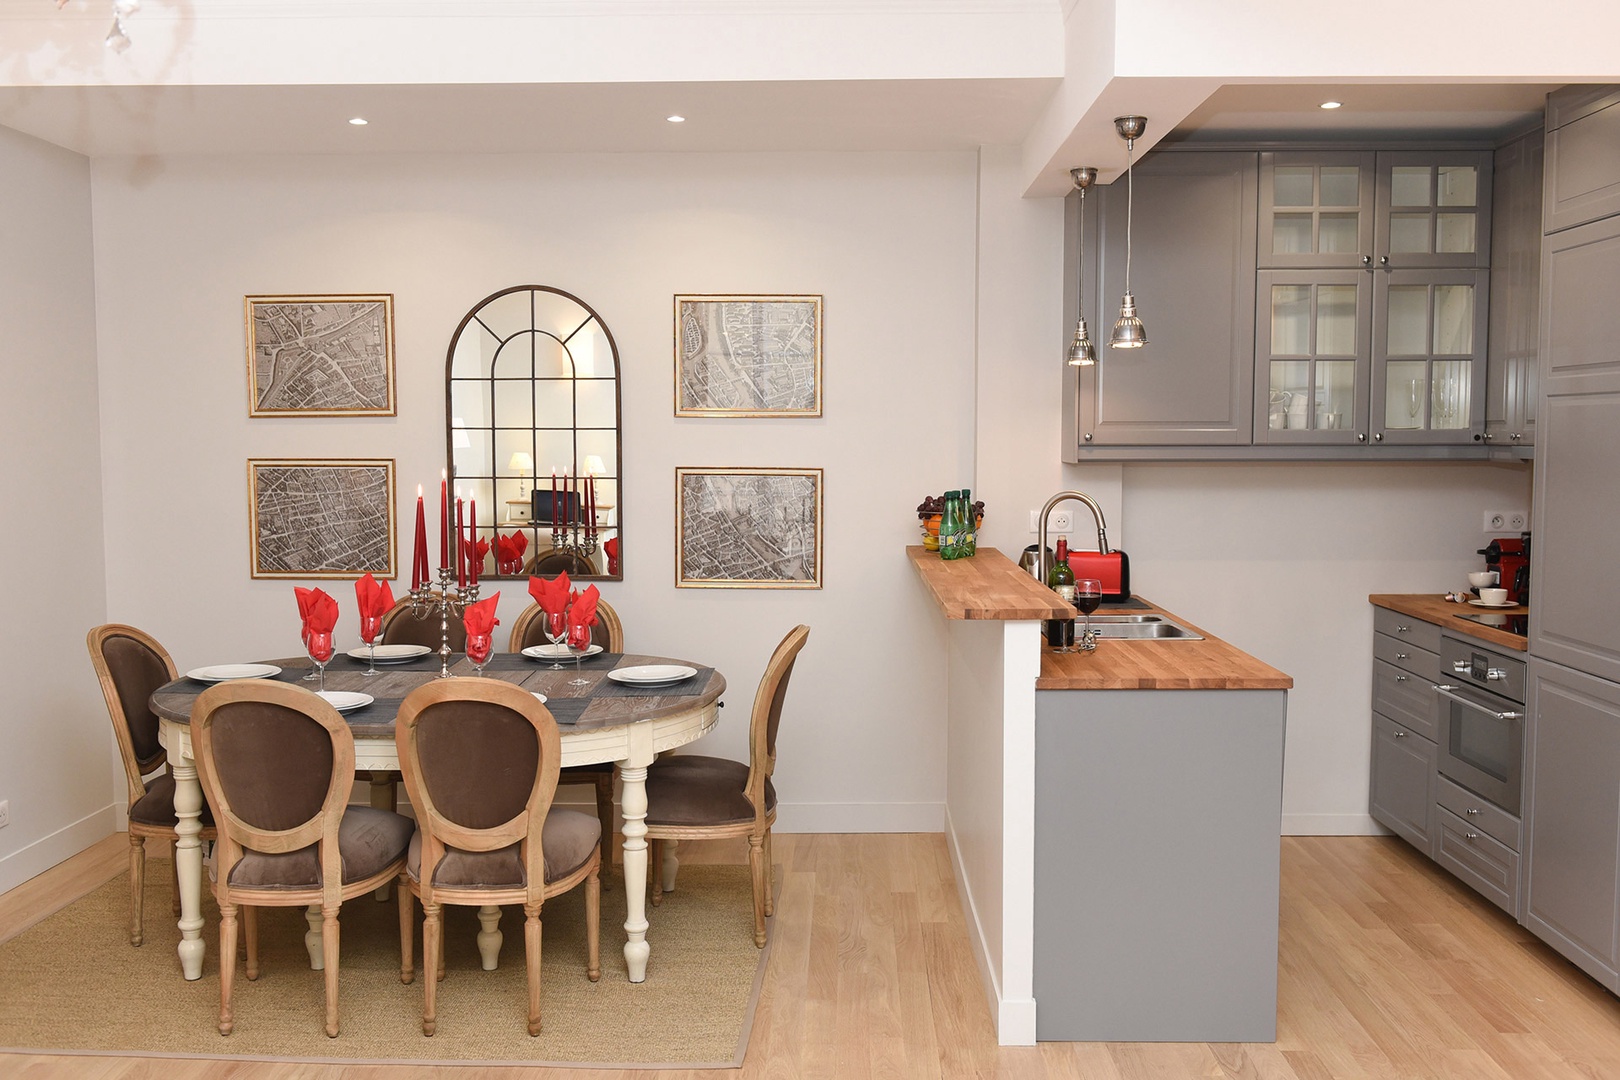 The open-plan kitchen and dining area is great for easy serving.